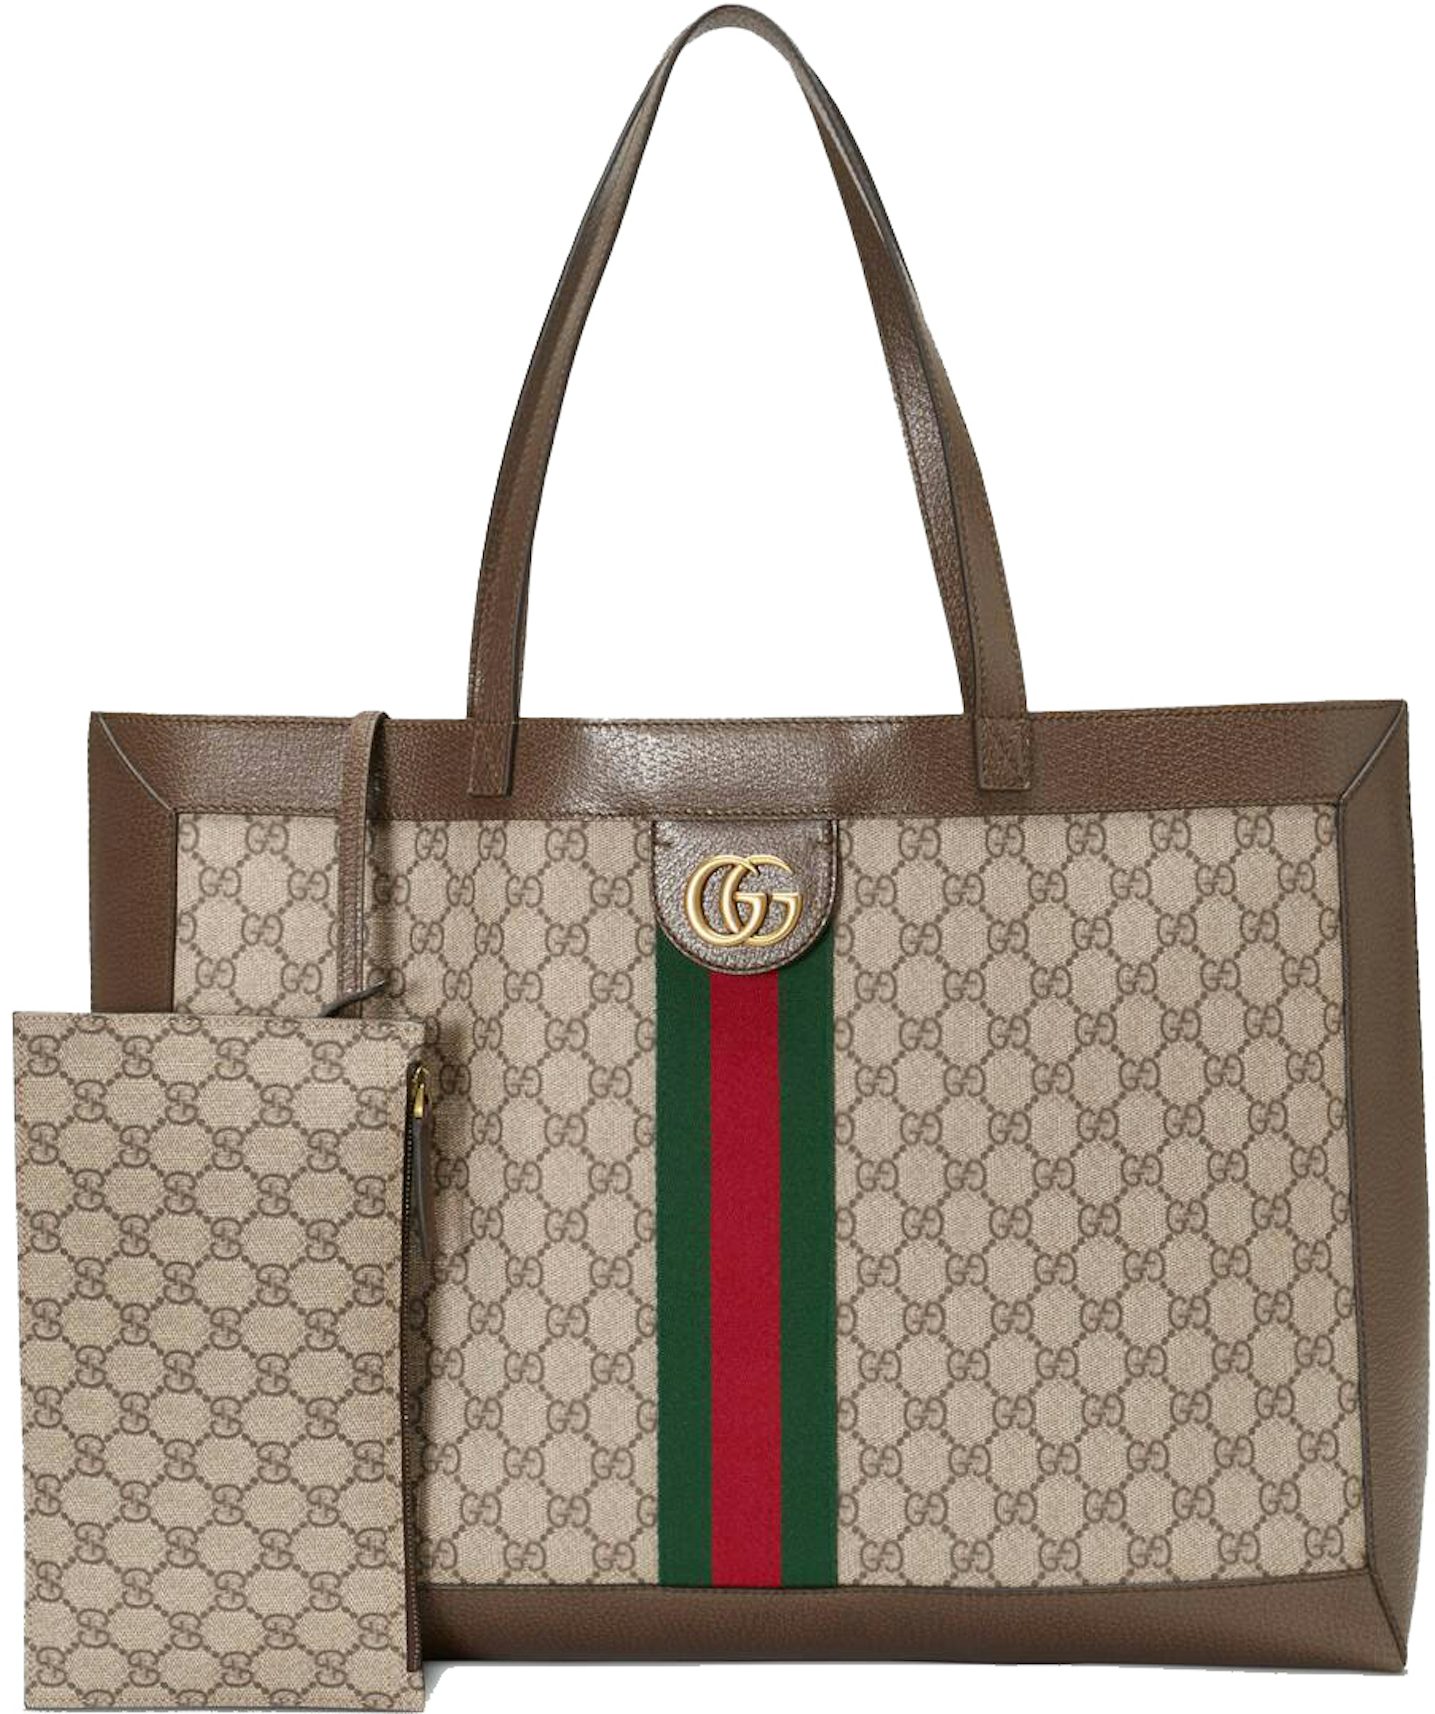 Gucci Ophidia Medium Tote Bag Black Leather with Gold-Toned